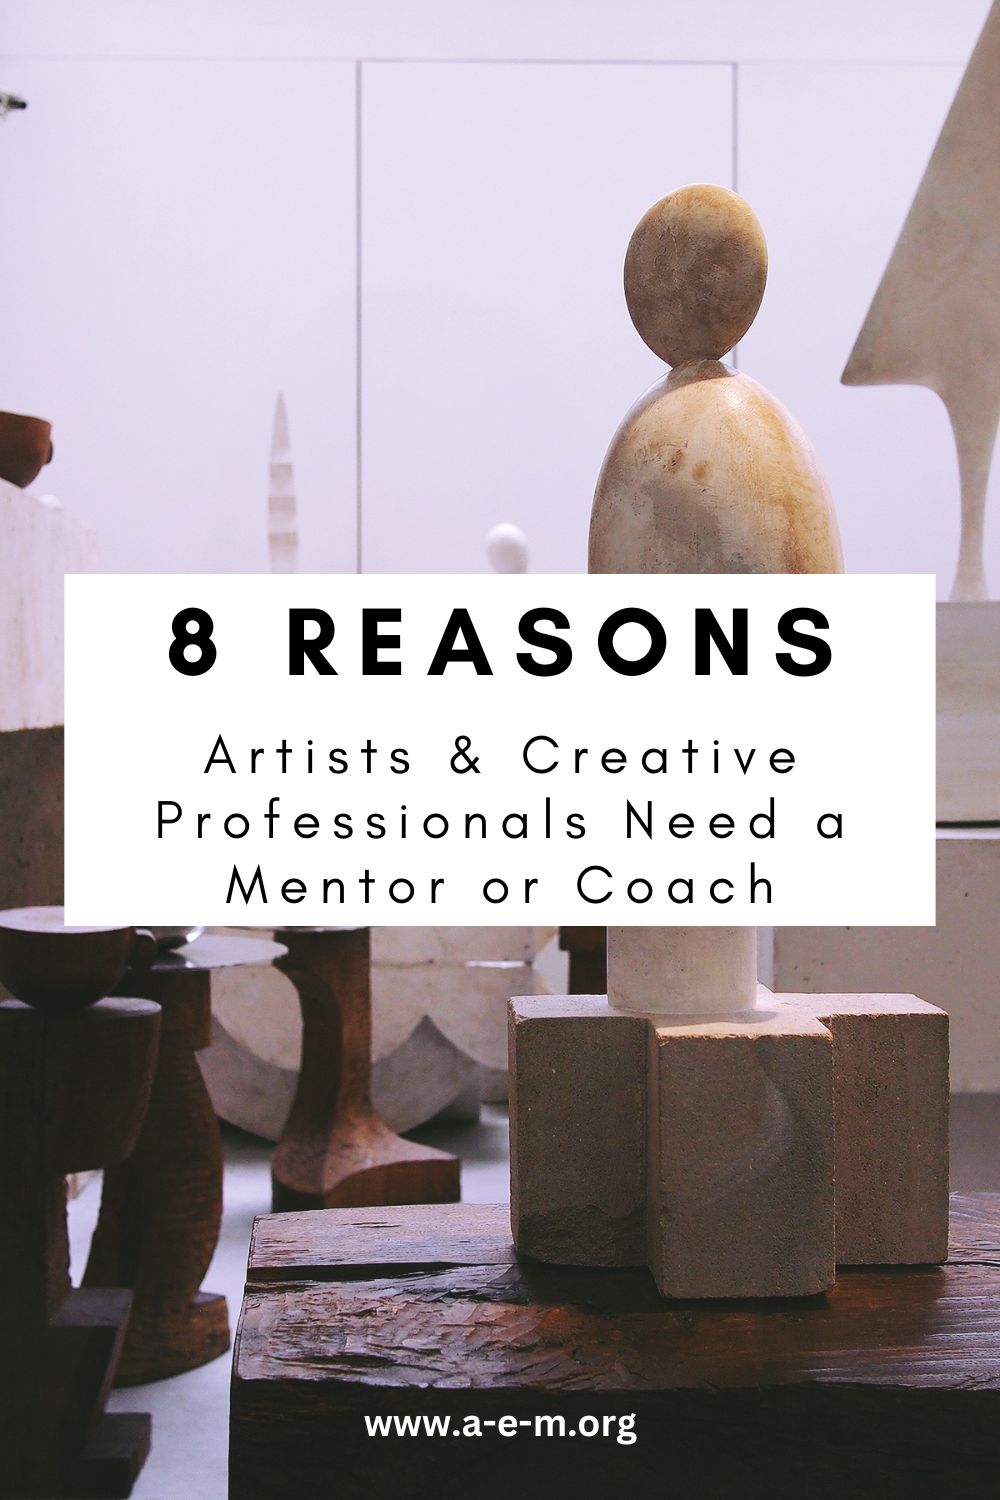 8 reasons why artists and creative professionals need a coach or mentor